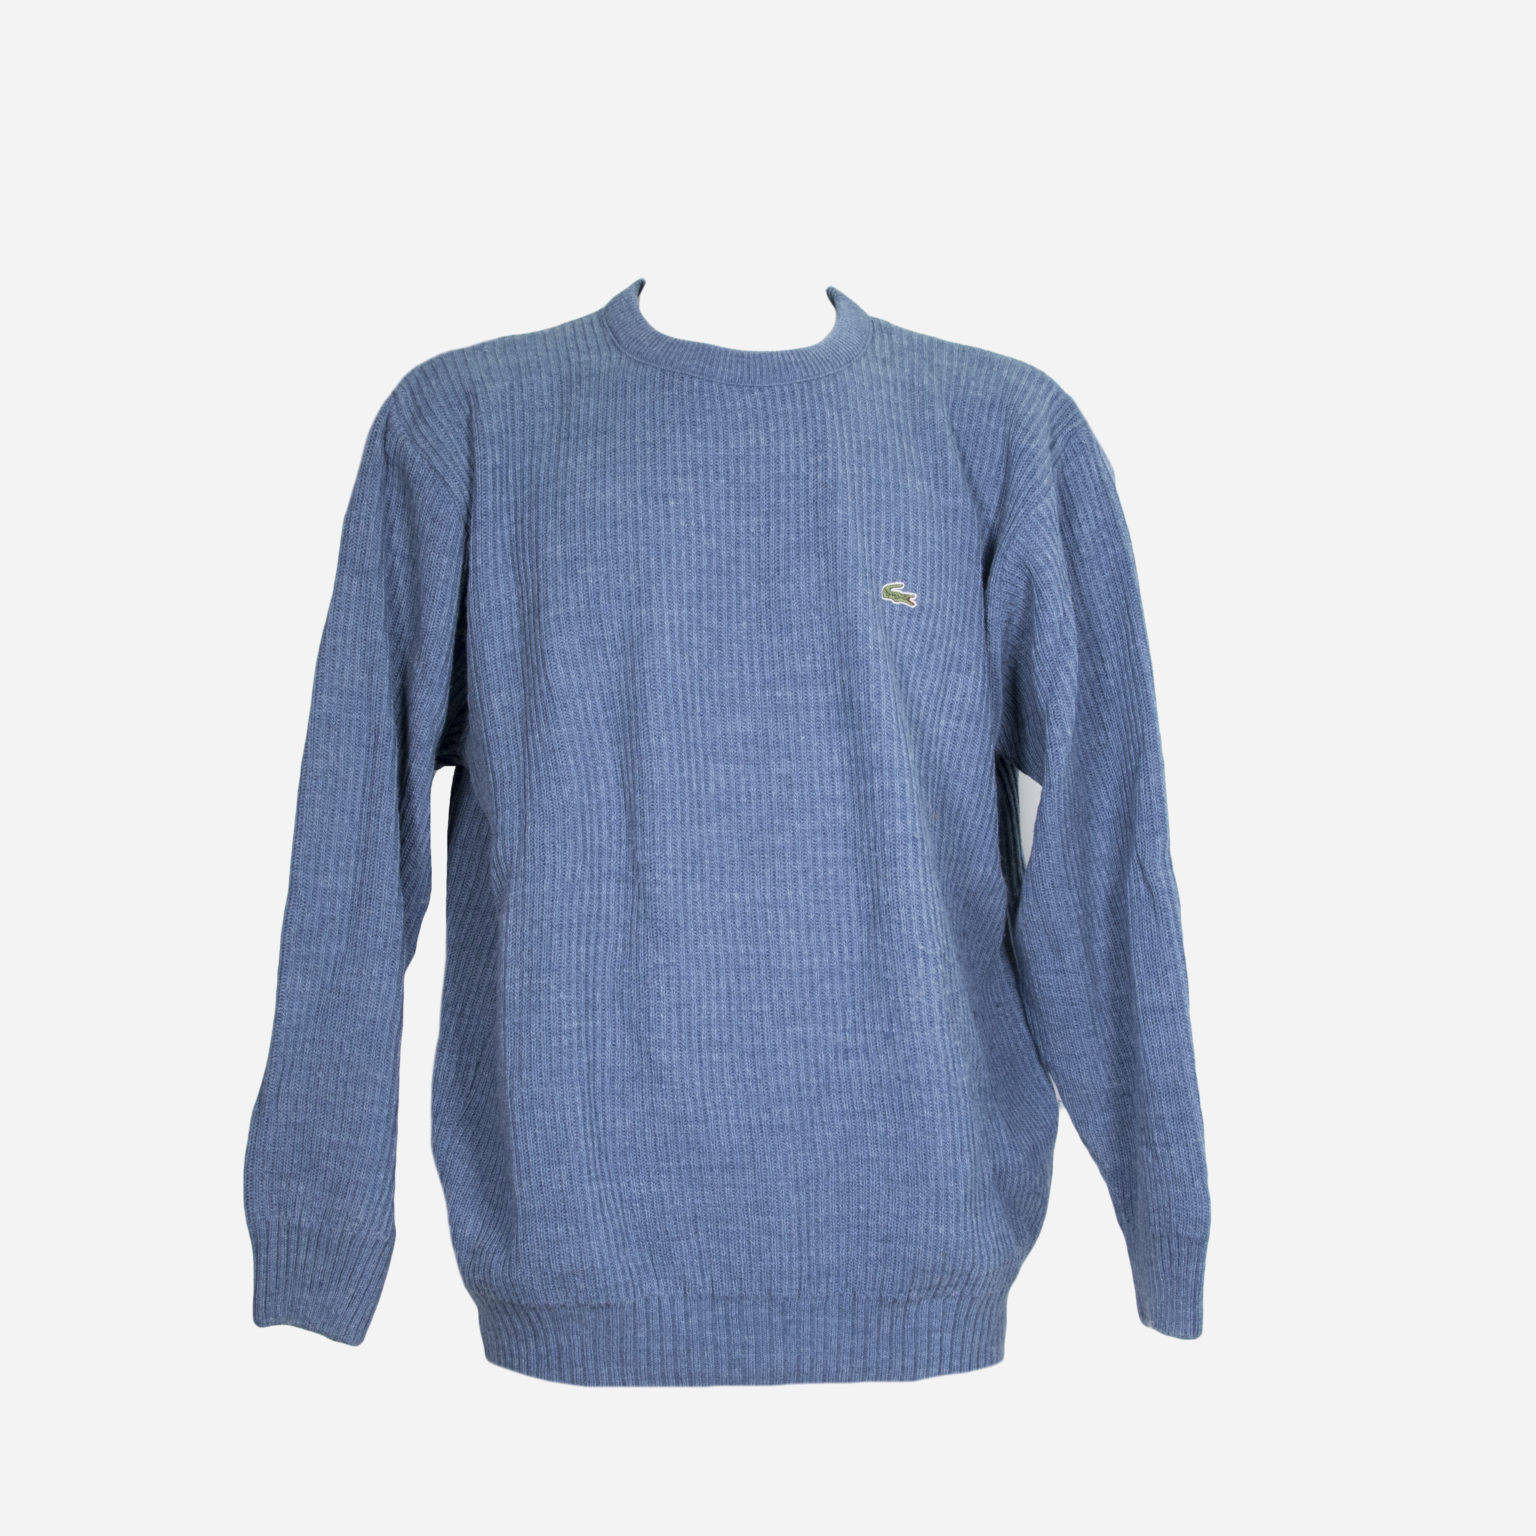 Maglioni-firmati-uomo-Branded-jumpers-for-man_NORMAL_12273